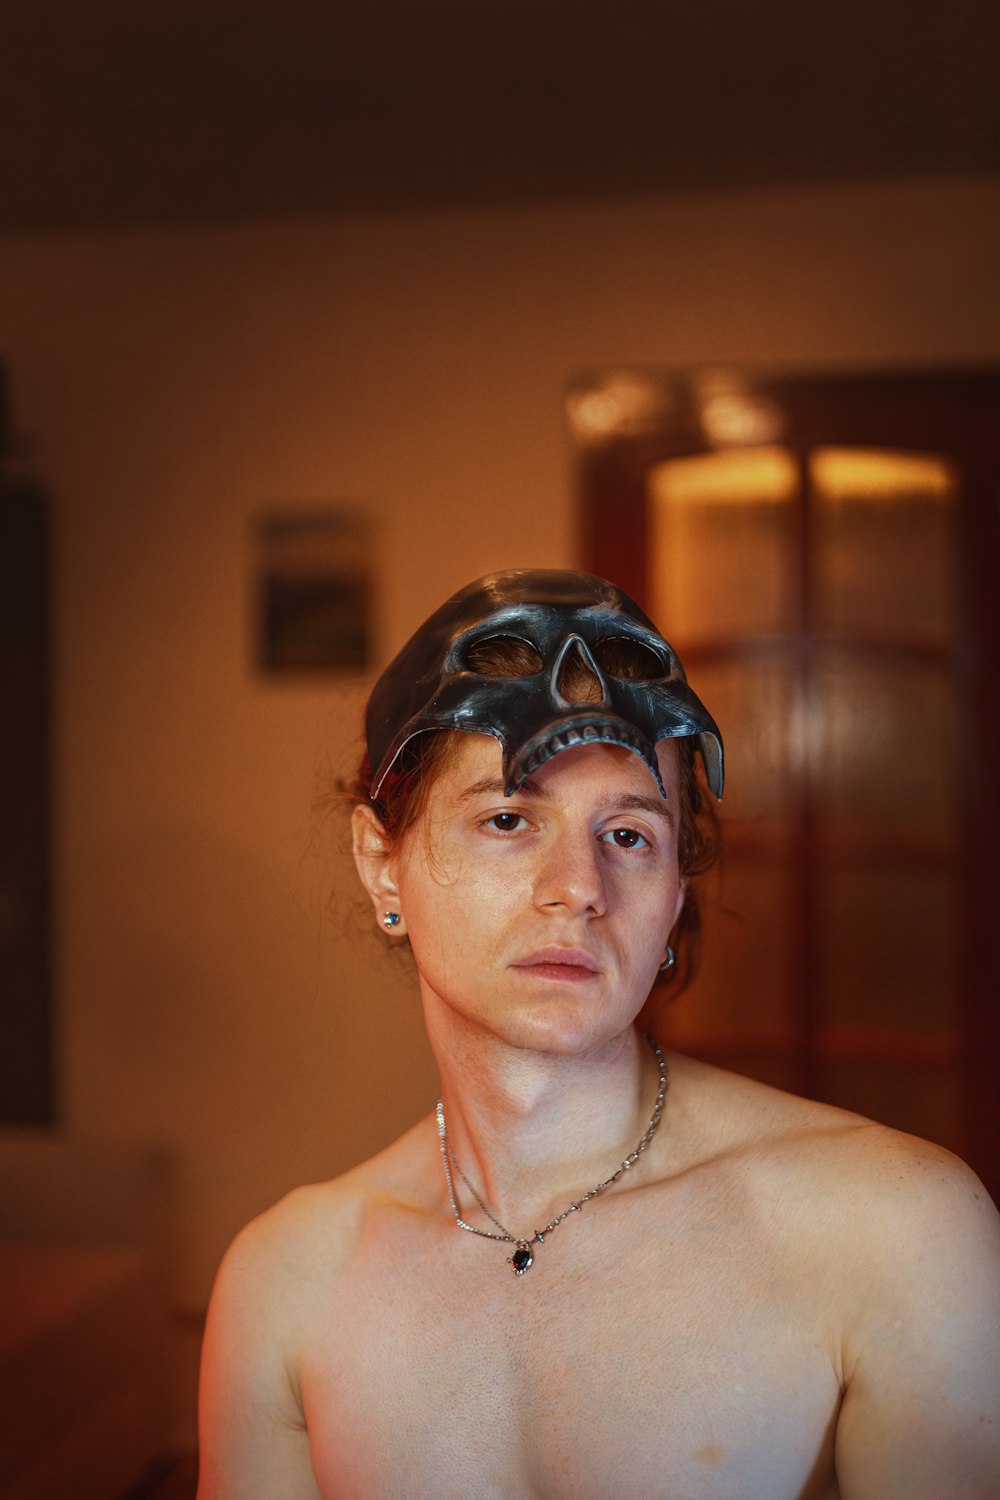 a shirtless man wearing a helmet in a room